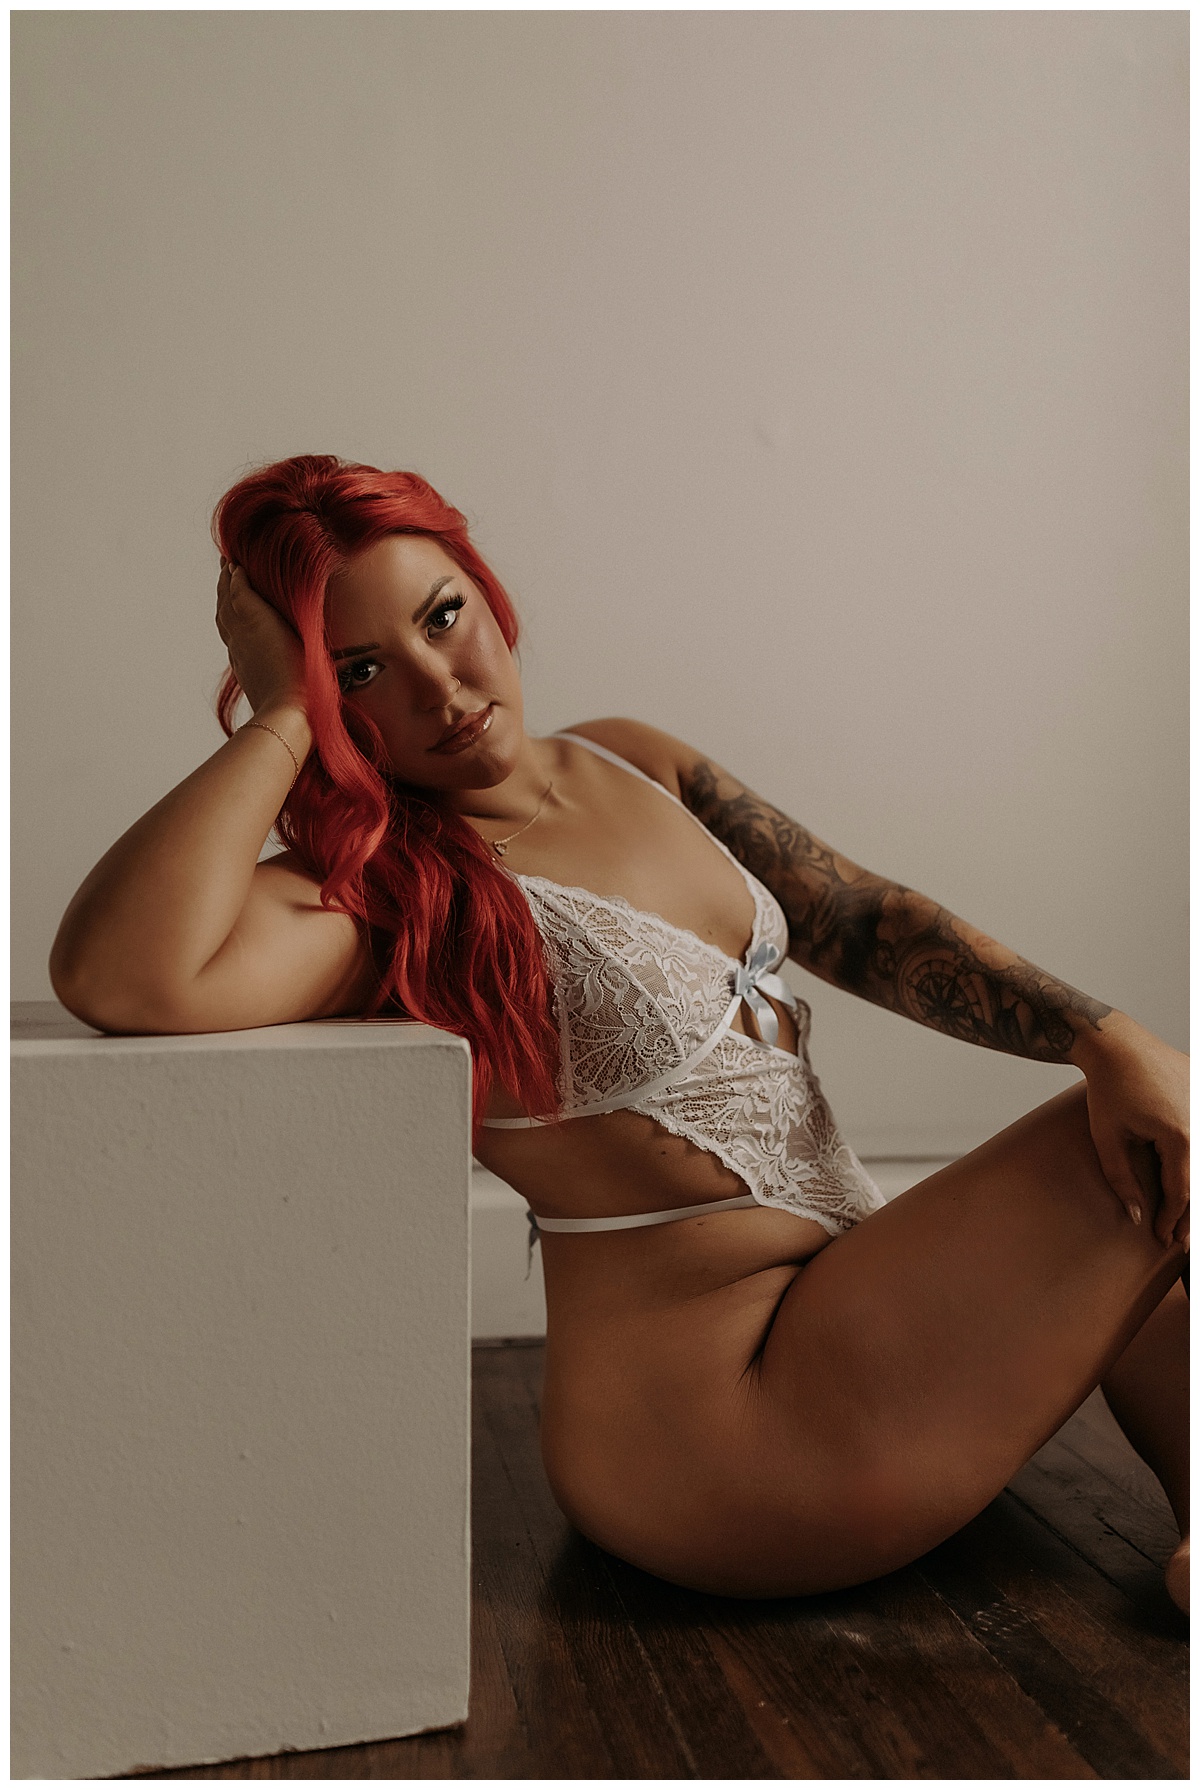 Adult sits on the floor wearing lingerie for Mary Castillo Photography